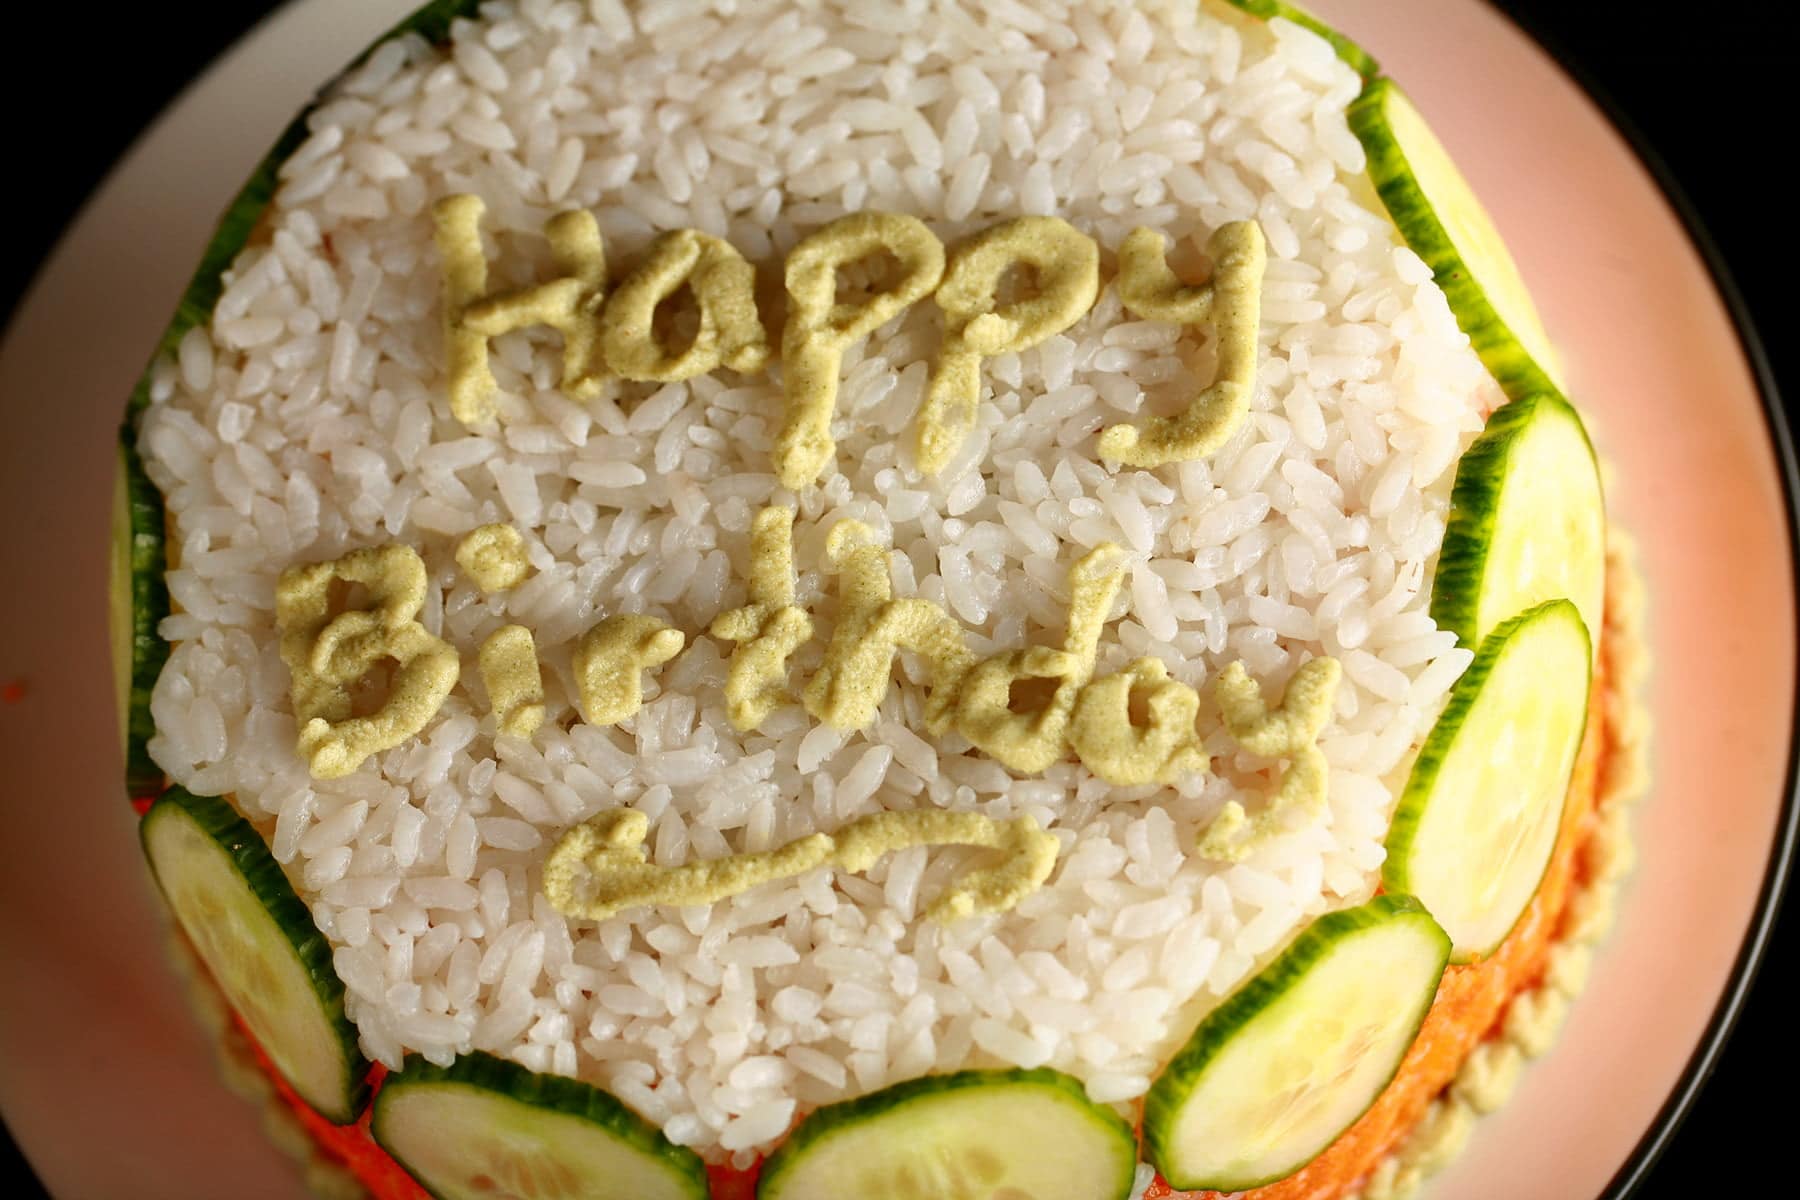 A small "birthday cake" made of white and orange rice and cucumber slices. "Happy Birthday" is written on the top, in wasabi.